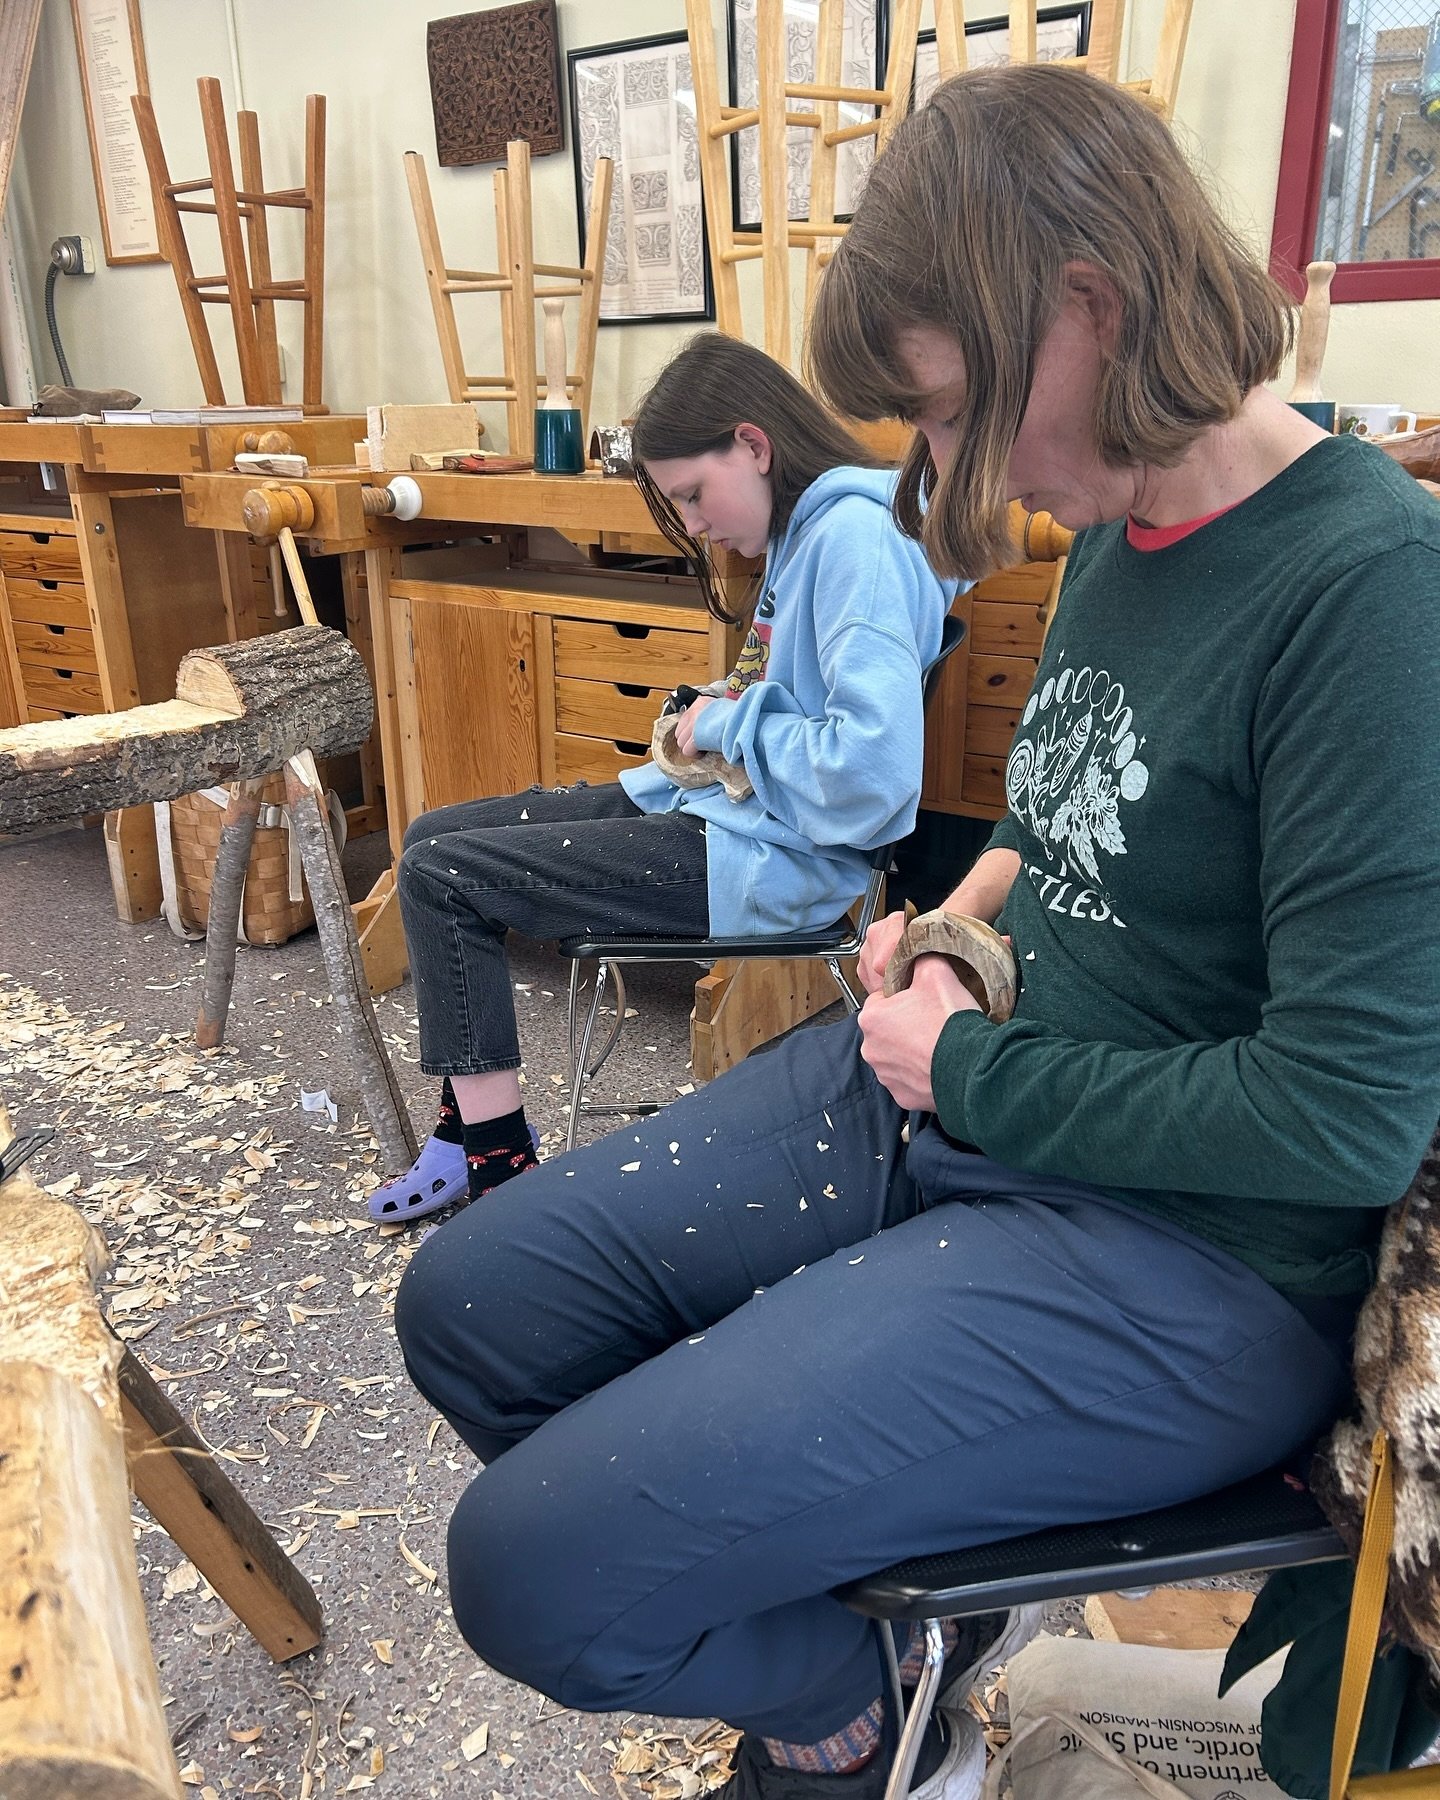 Kuksa Carving class at the Vesterheim museum was a success! Such a great time with everyone. I&rsquo;m tuckered out. Four huge classes this month! Many said it couldn&rsquo;t be done but we did it sloyders!

It&rsquo;s been really nice meeting new pe